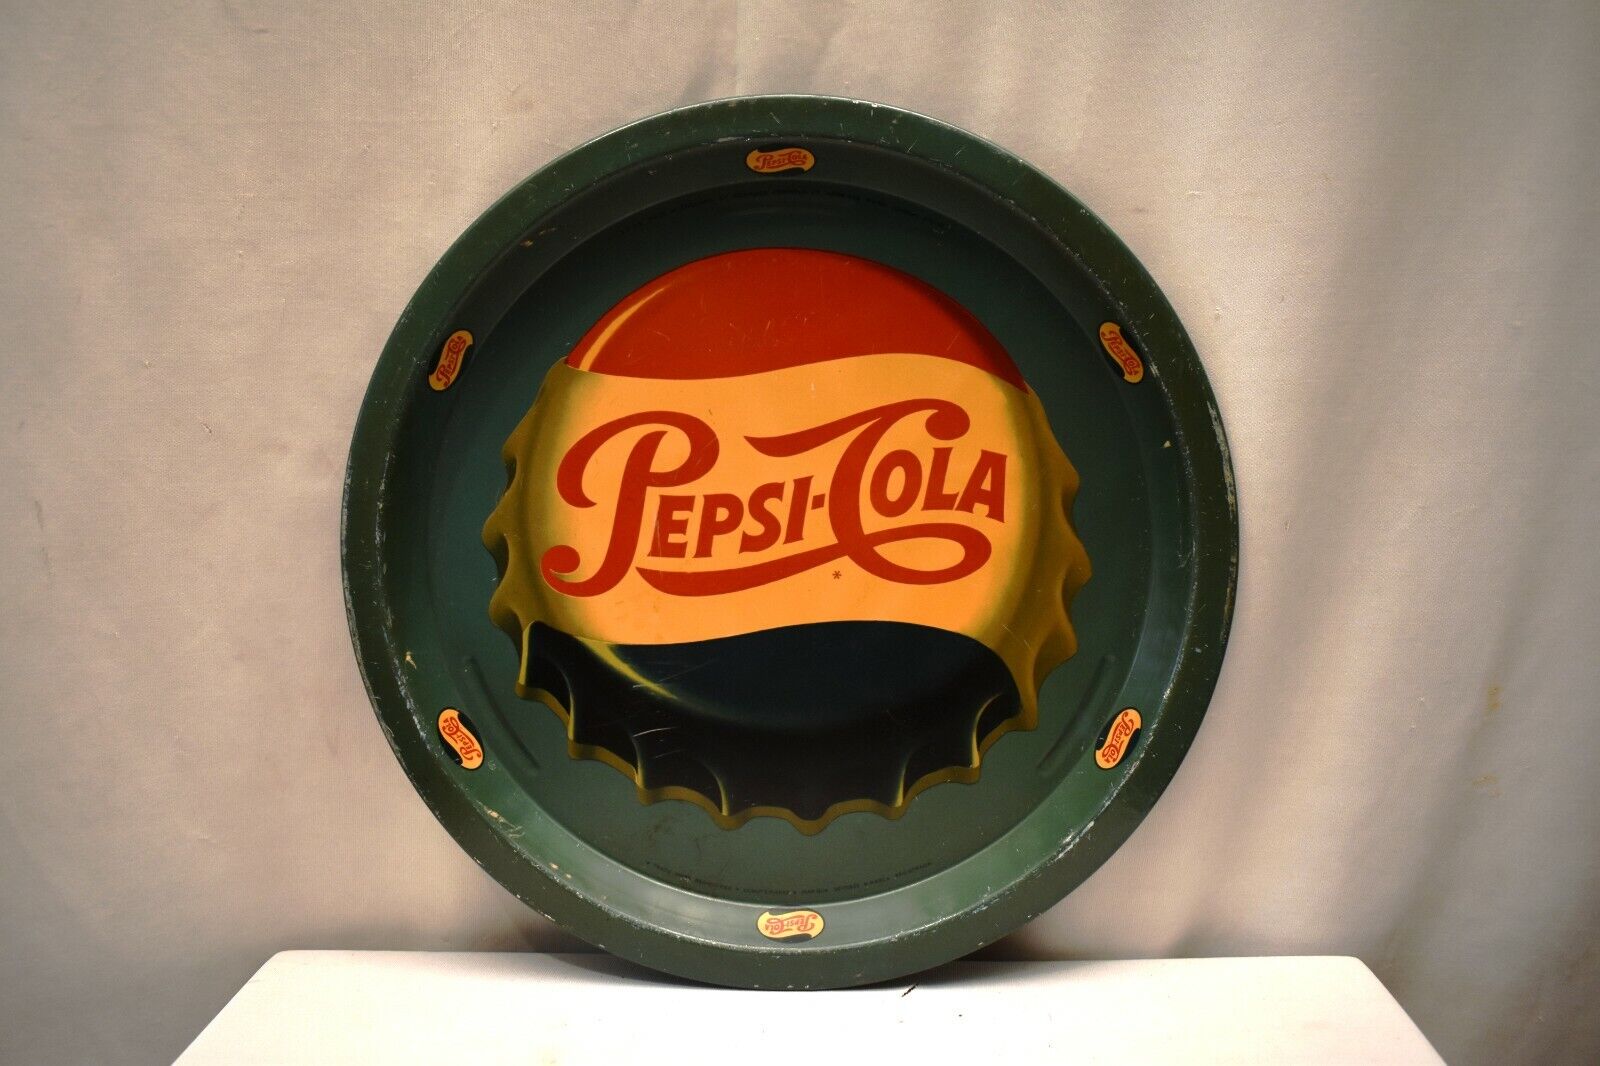 Vintage Pepsi-Cola Metal Tray Advertising Carbonated Soft Drink Collectibles \